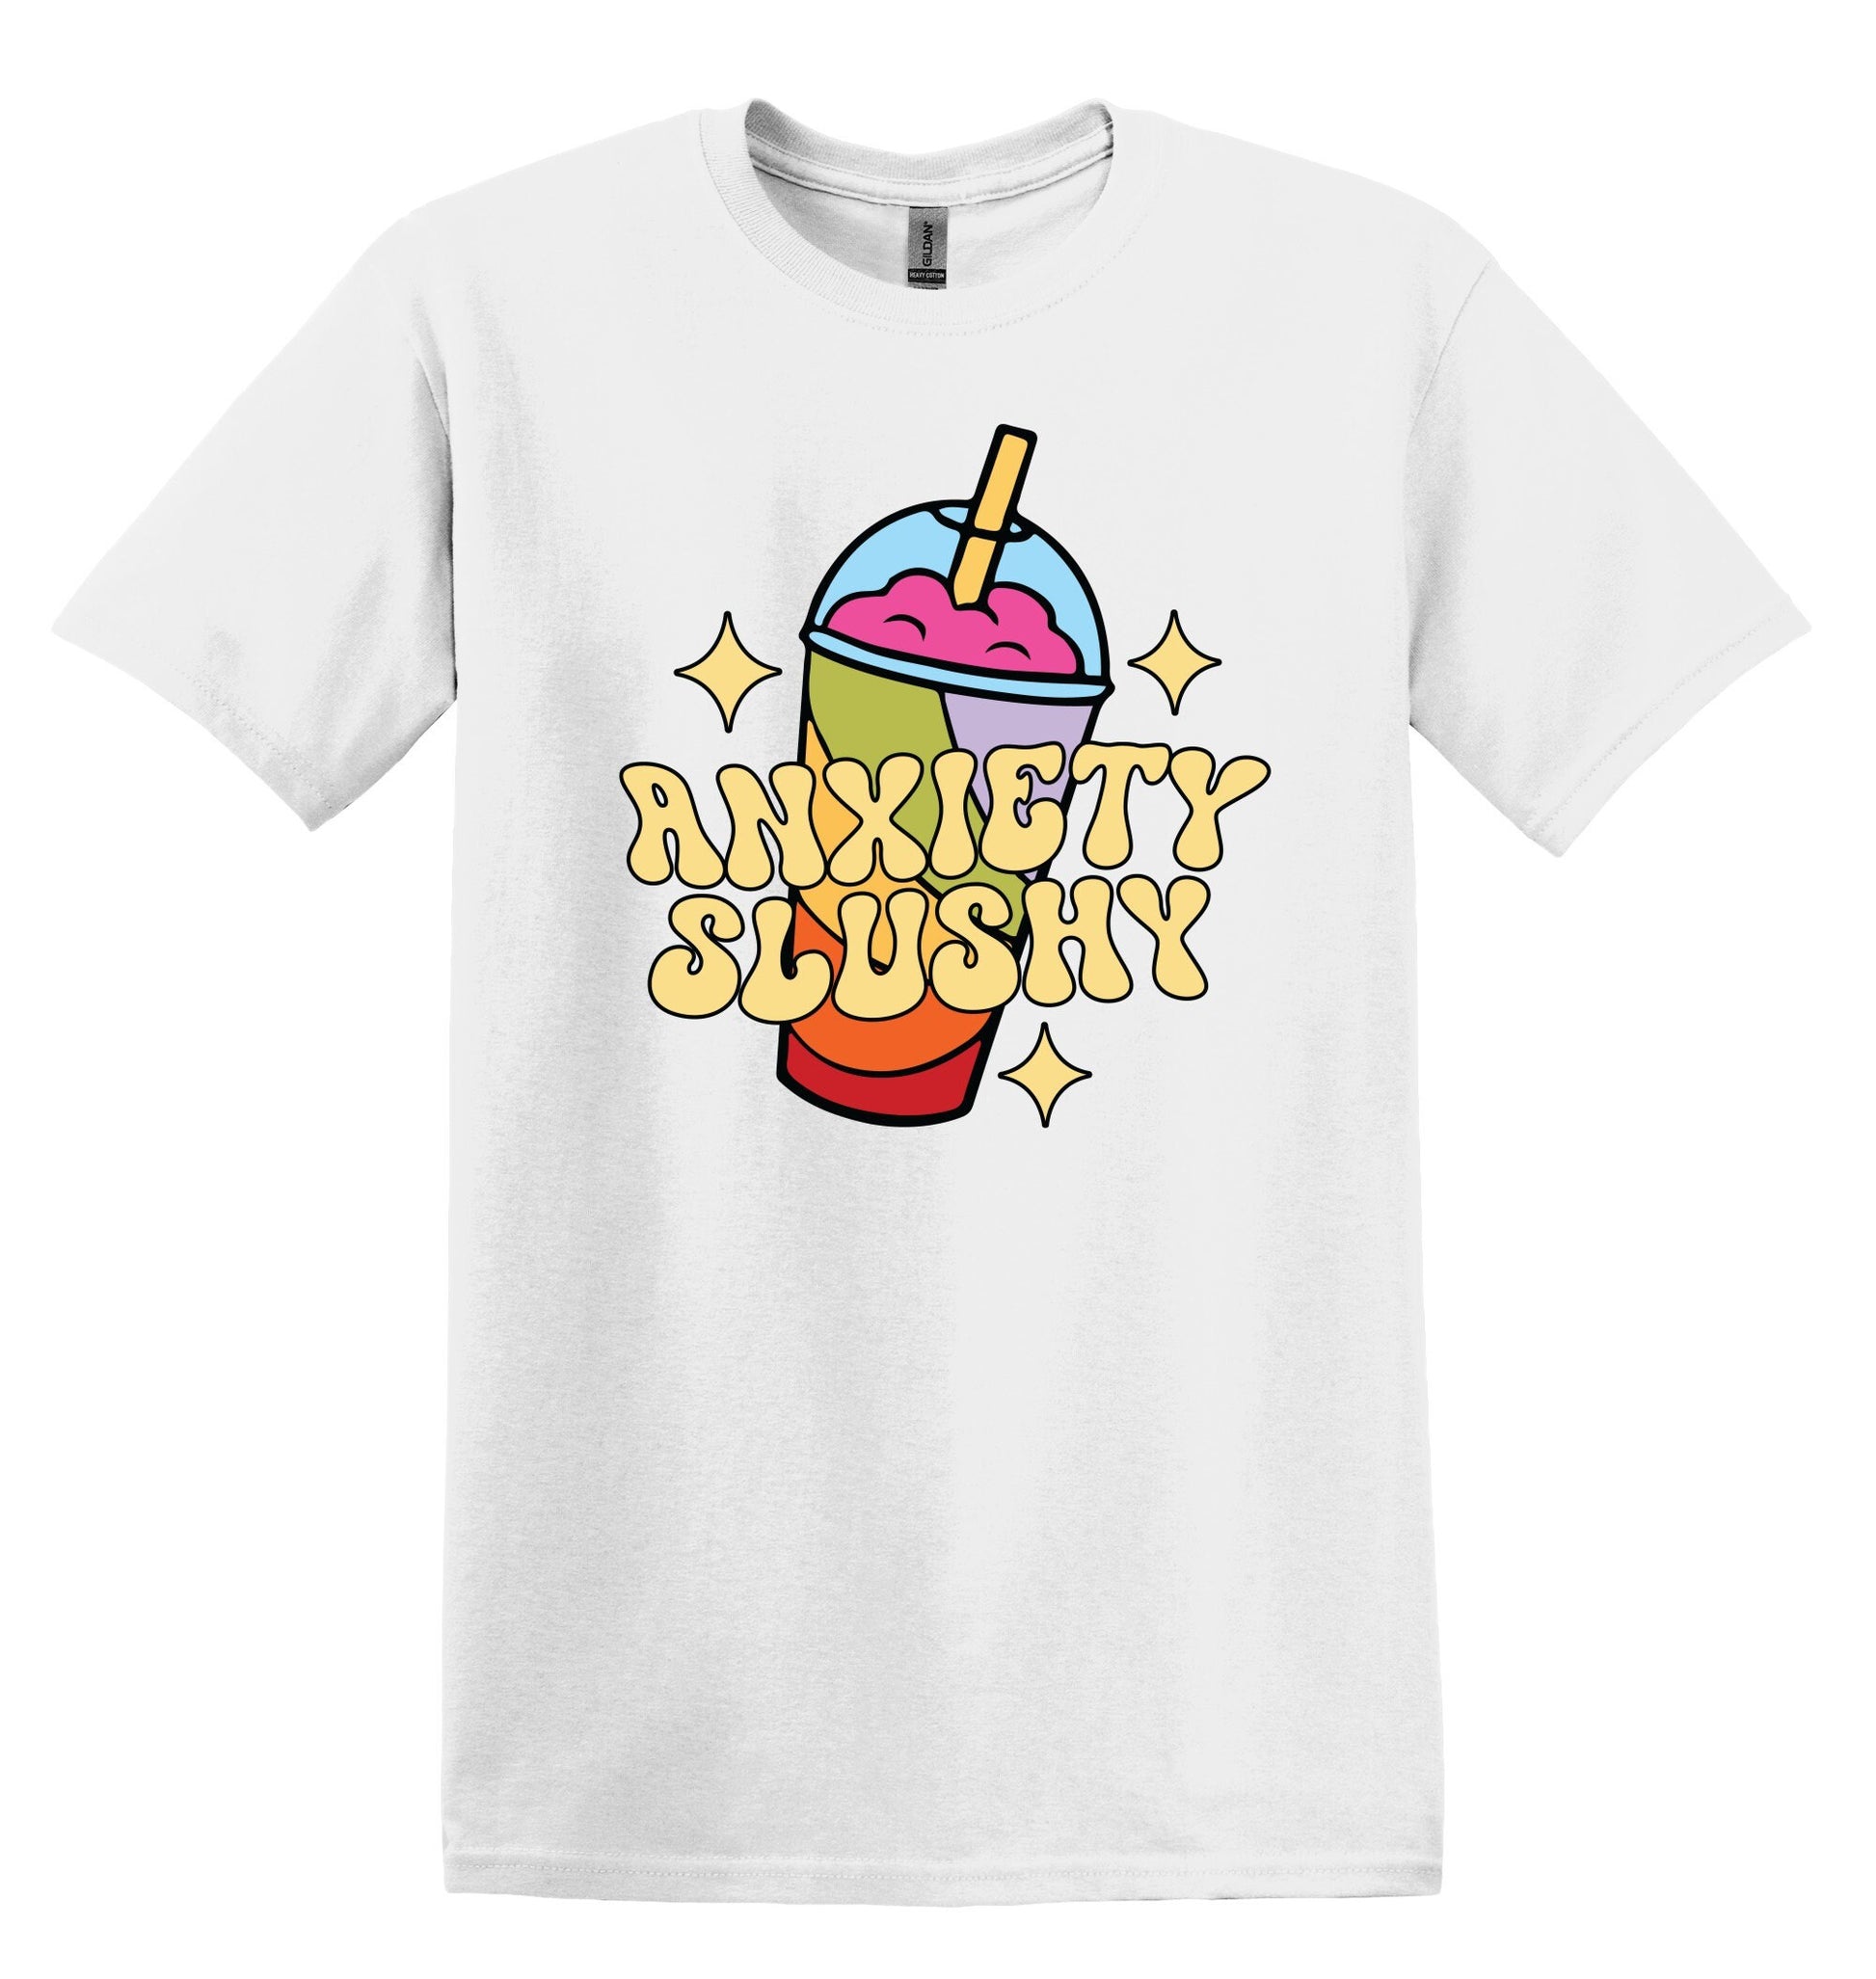 Funny Anxiety Slushie Shirt for Positive Mental Health Vibes